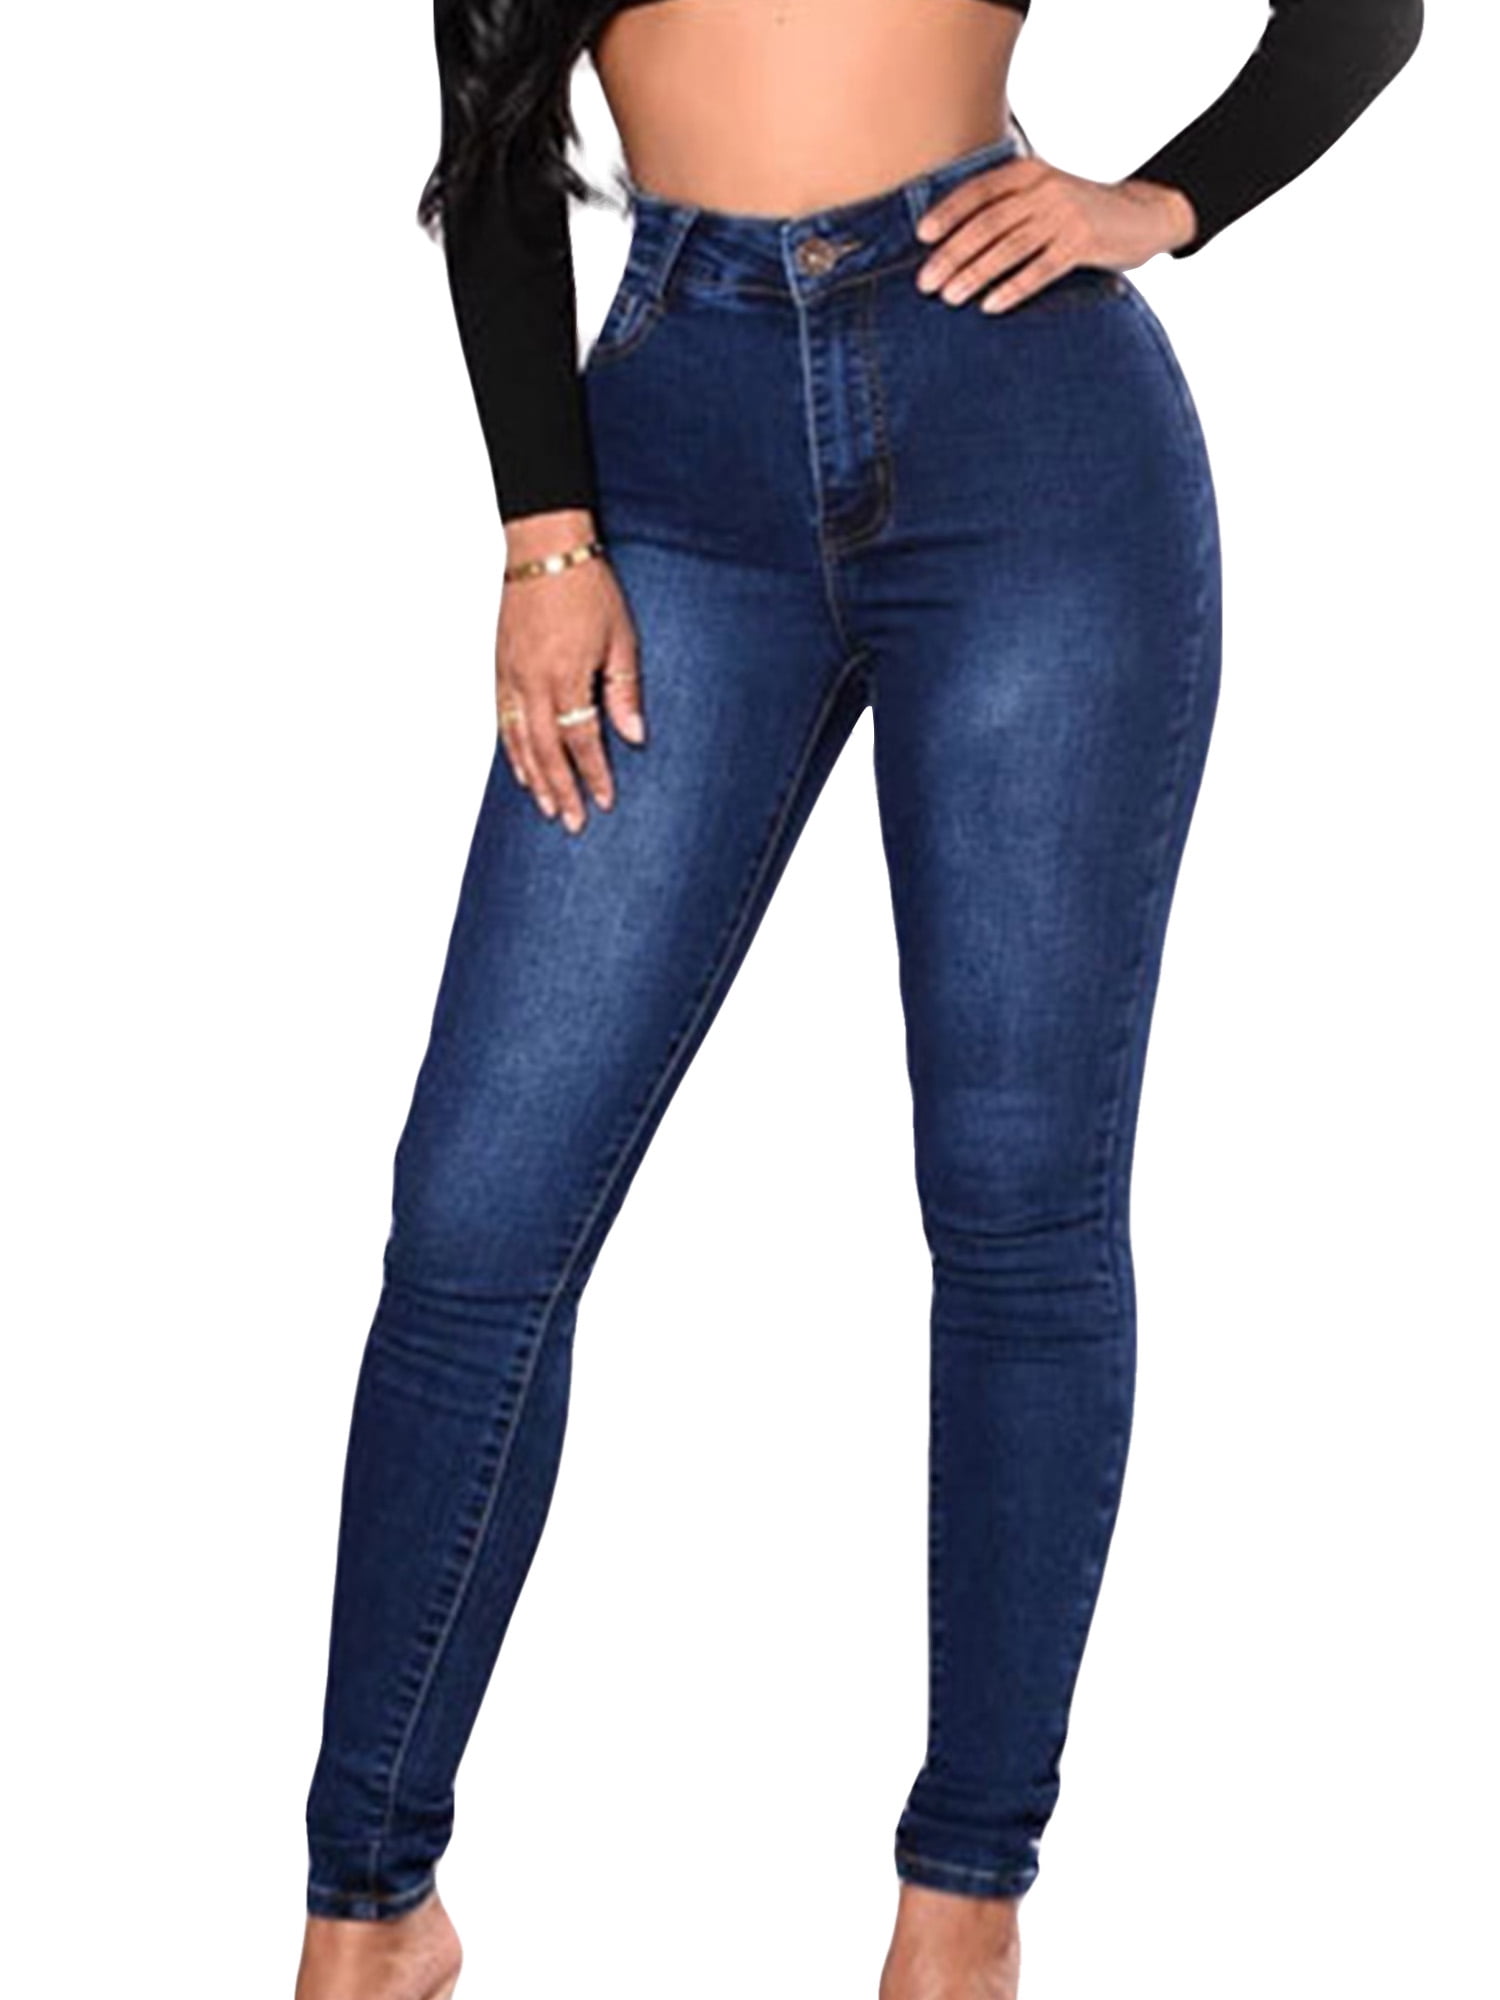 Women Push-Up Butt Lifting High Waist Stretchy Skinny Jeans Casual Denim  Pants Ladies Zipper Button Jegging Pencil Pants 